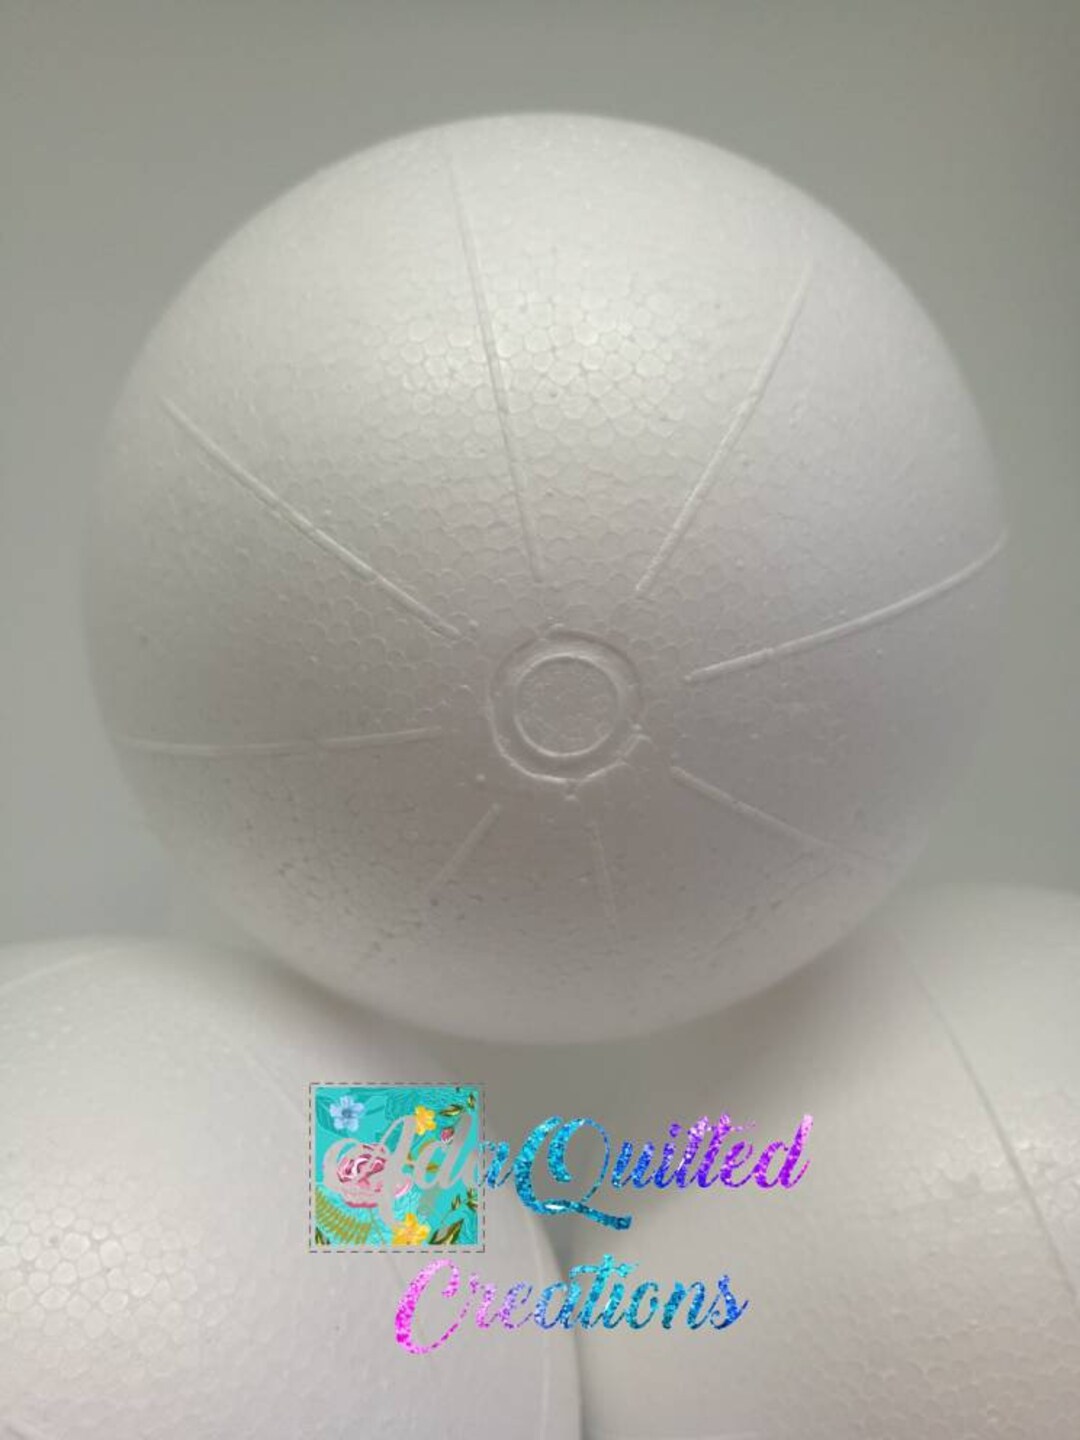 Ader Products Craft Styrofoam Balls (3 Inch - 7.62 cm) for DIY Crafting and  Decoration by My Toy House